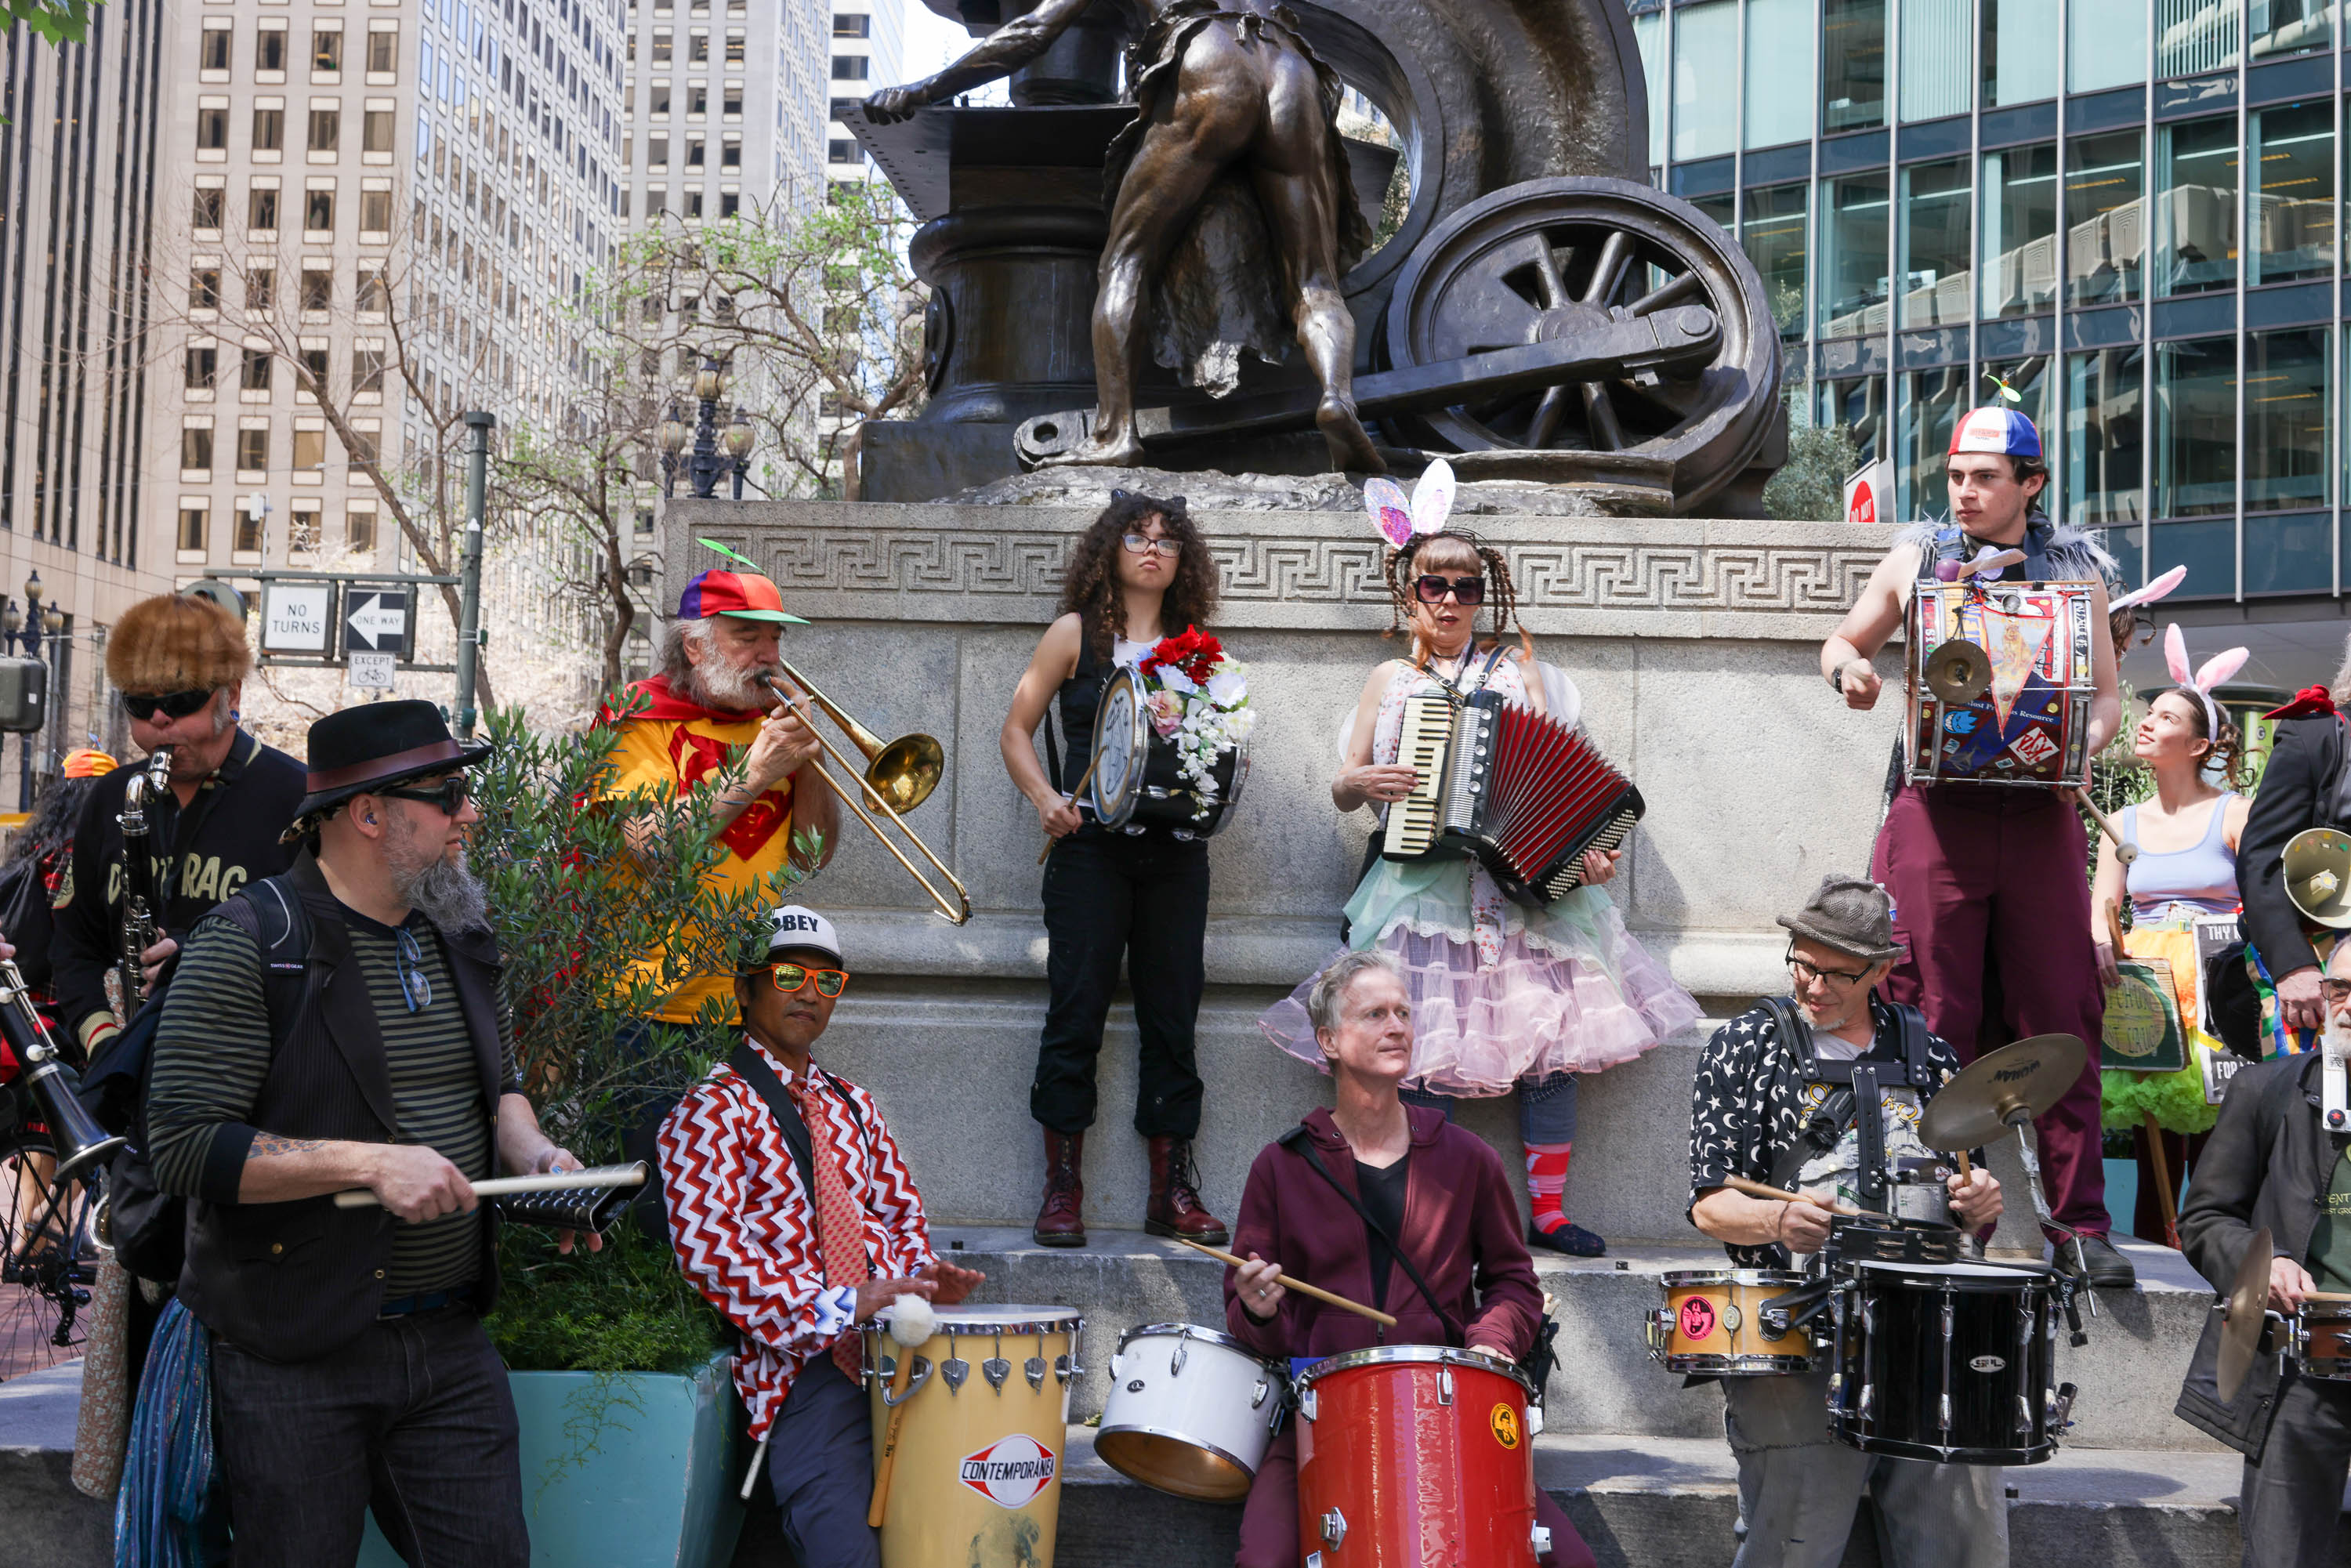 A lively street band with eclectic outfits plays instruments near a statue in an urban setting.